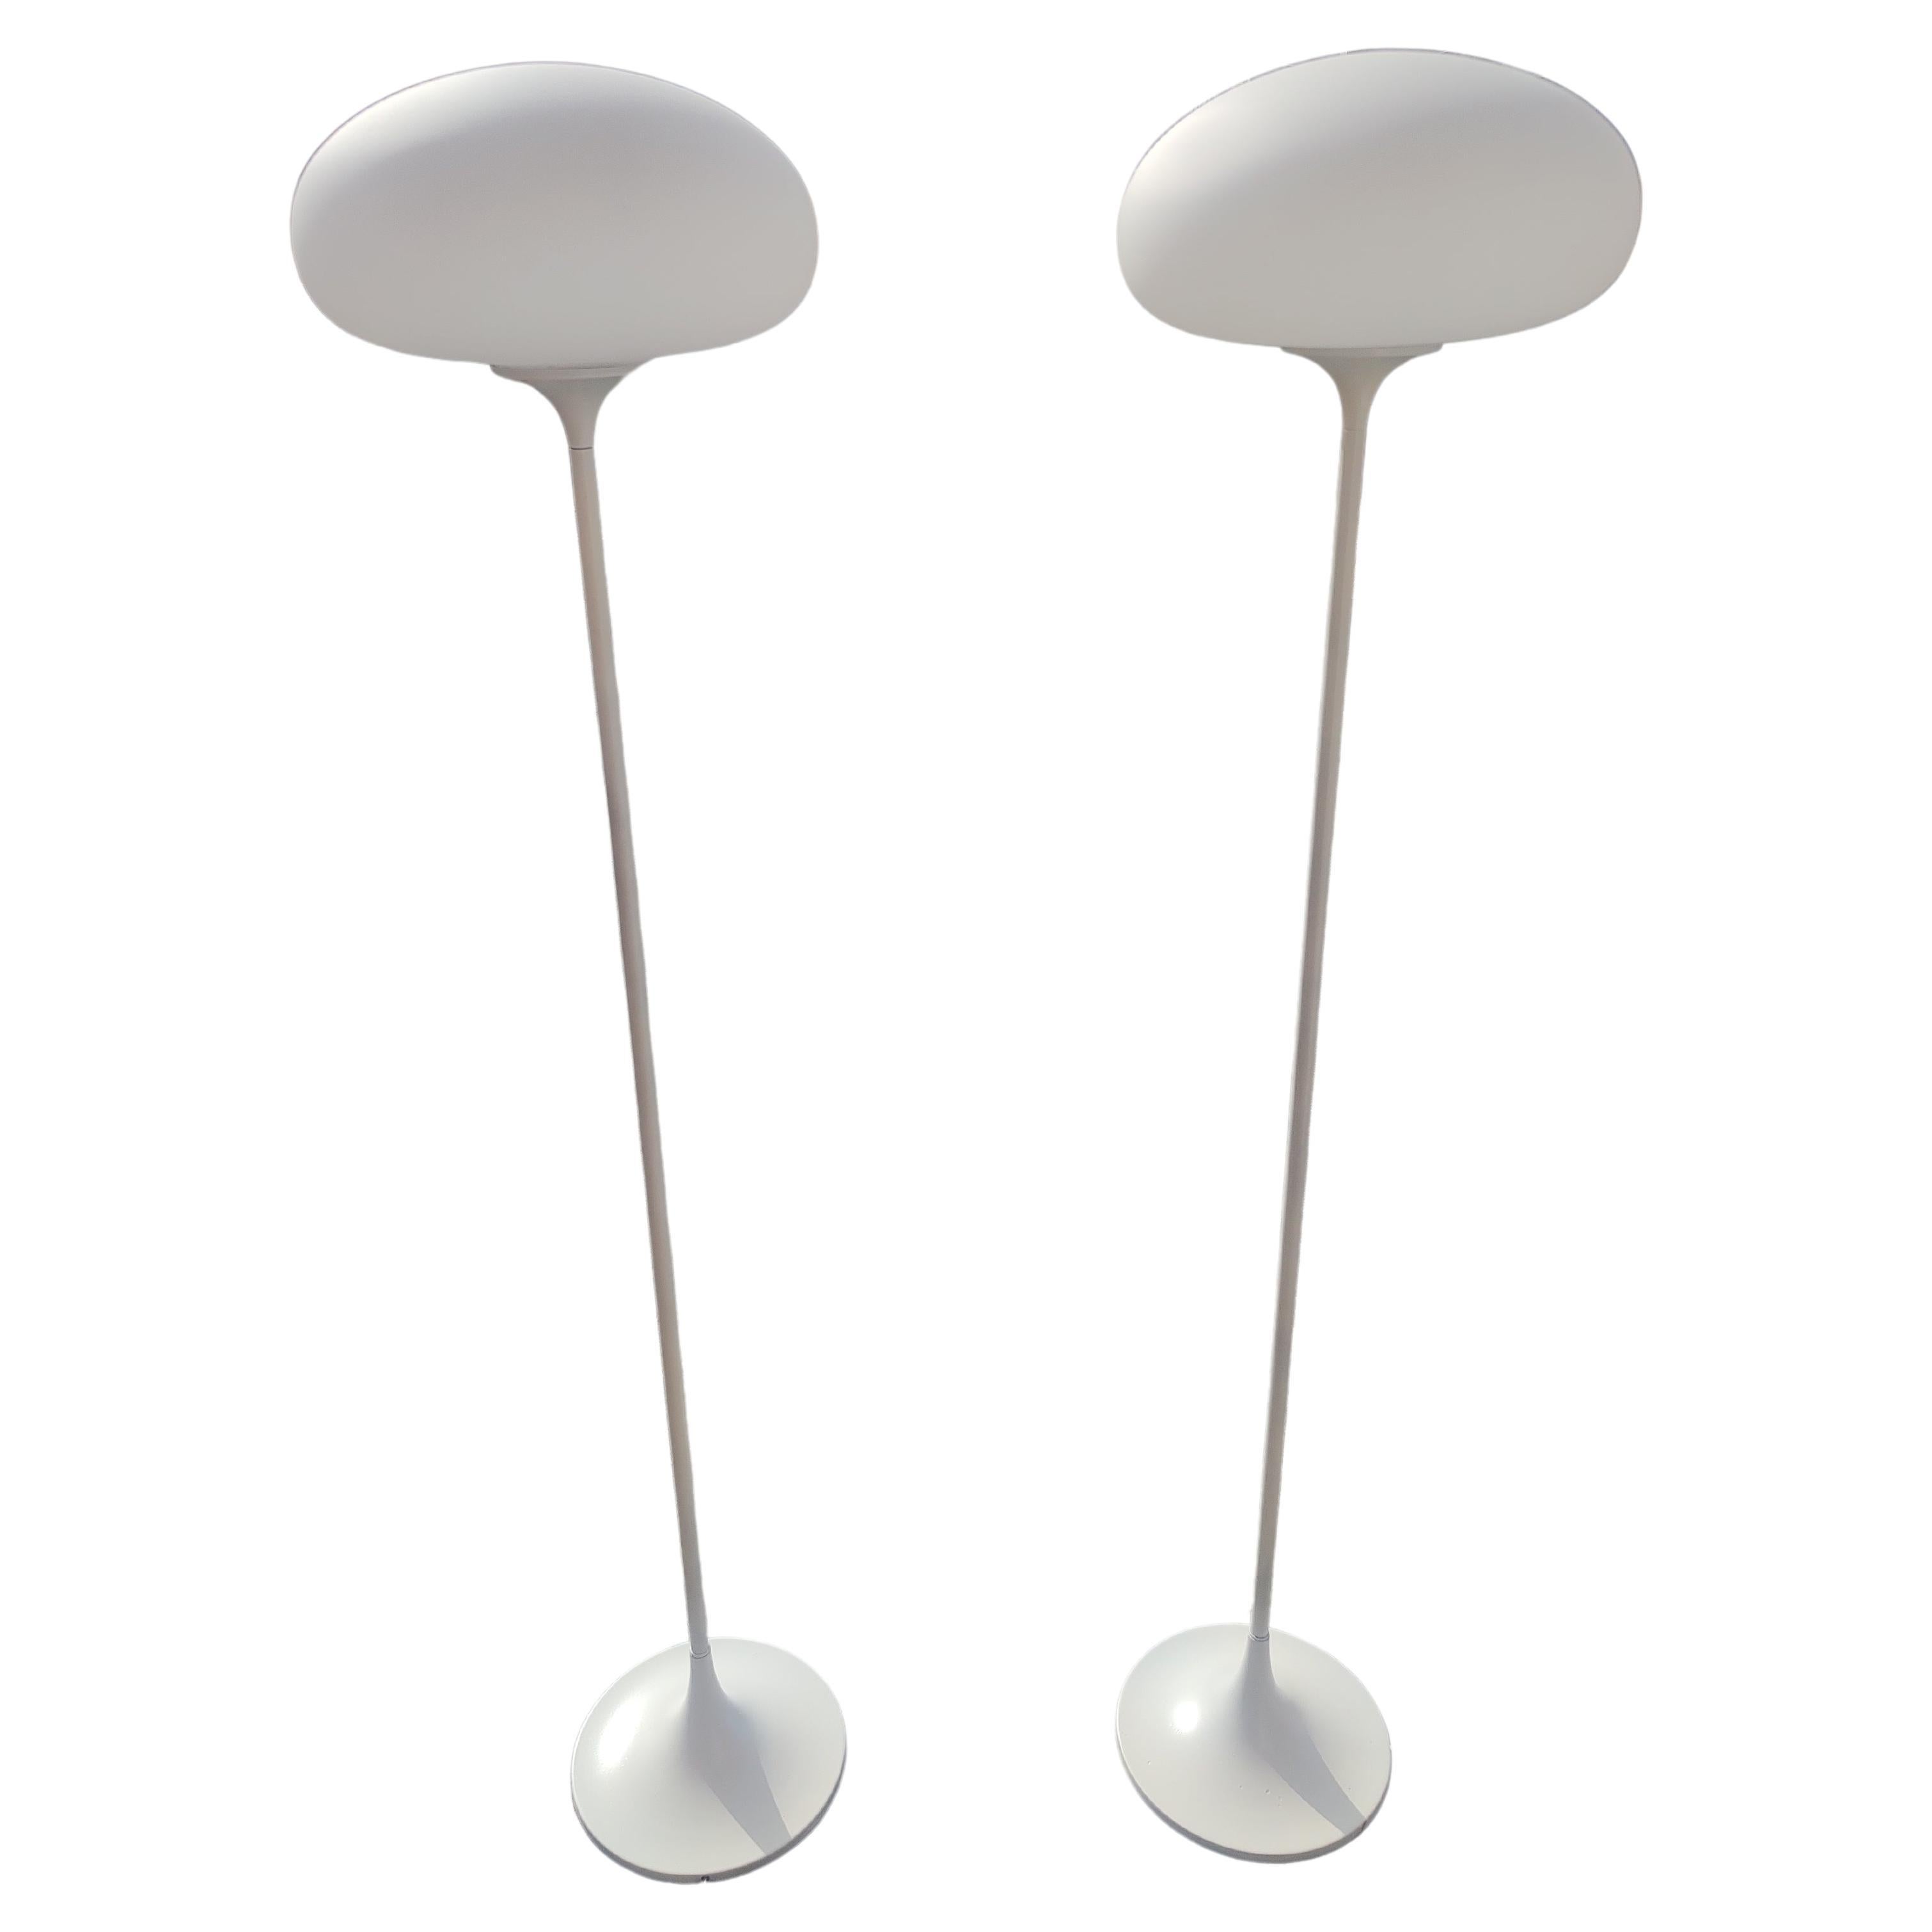 Mid-20th Century Pair of Mid Century Modern Sculptural Mushroom Floor Lamps by the Laurel Lamp Co For Sale